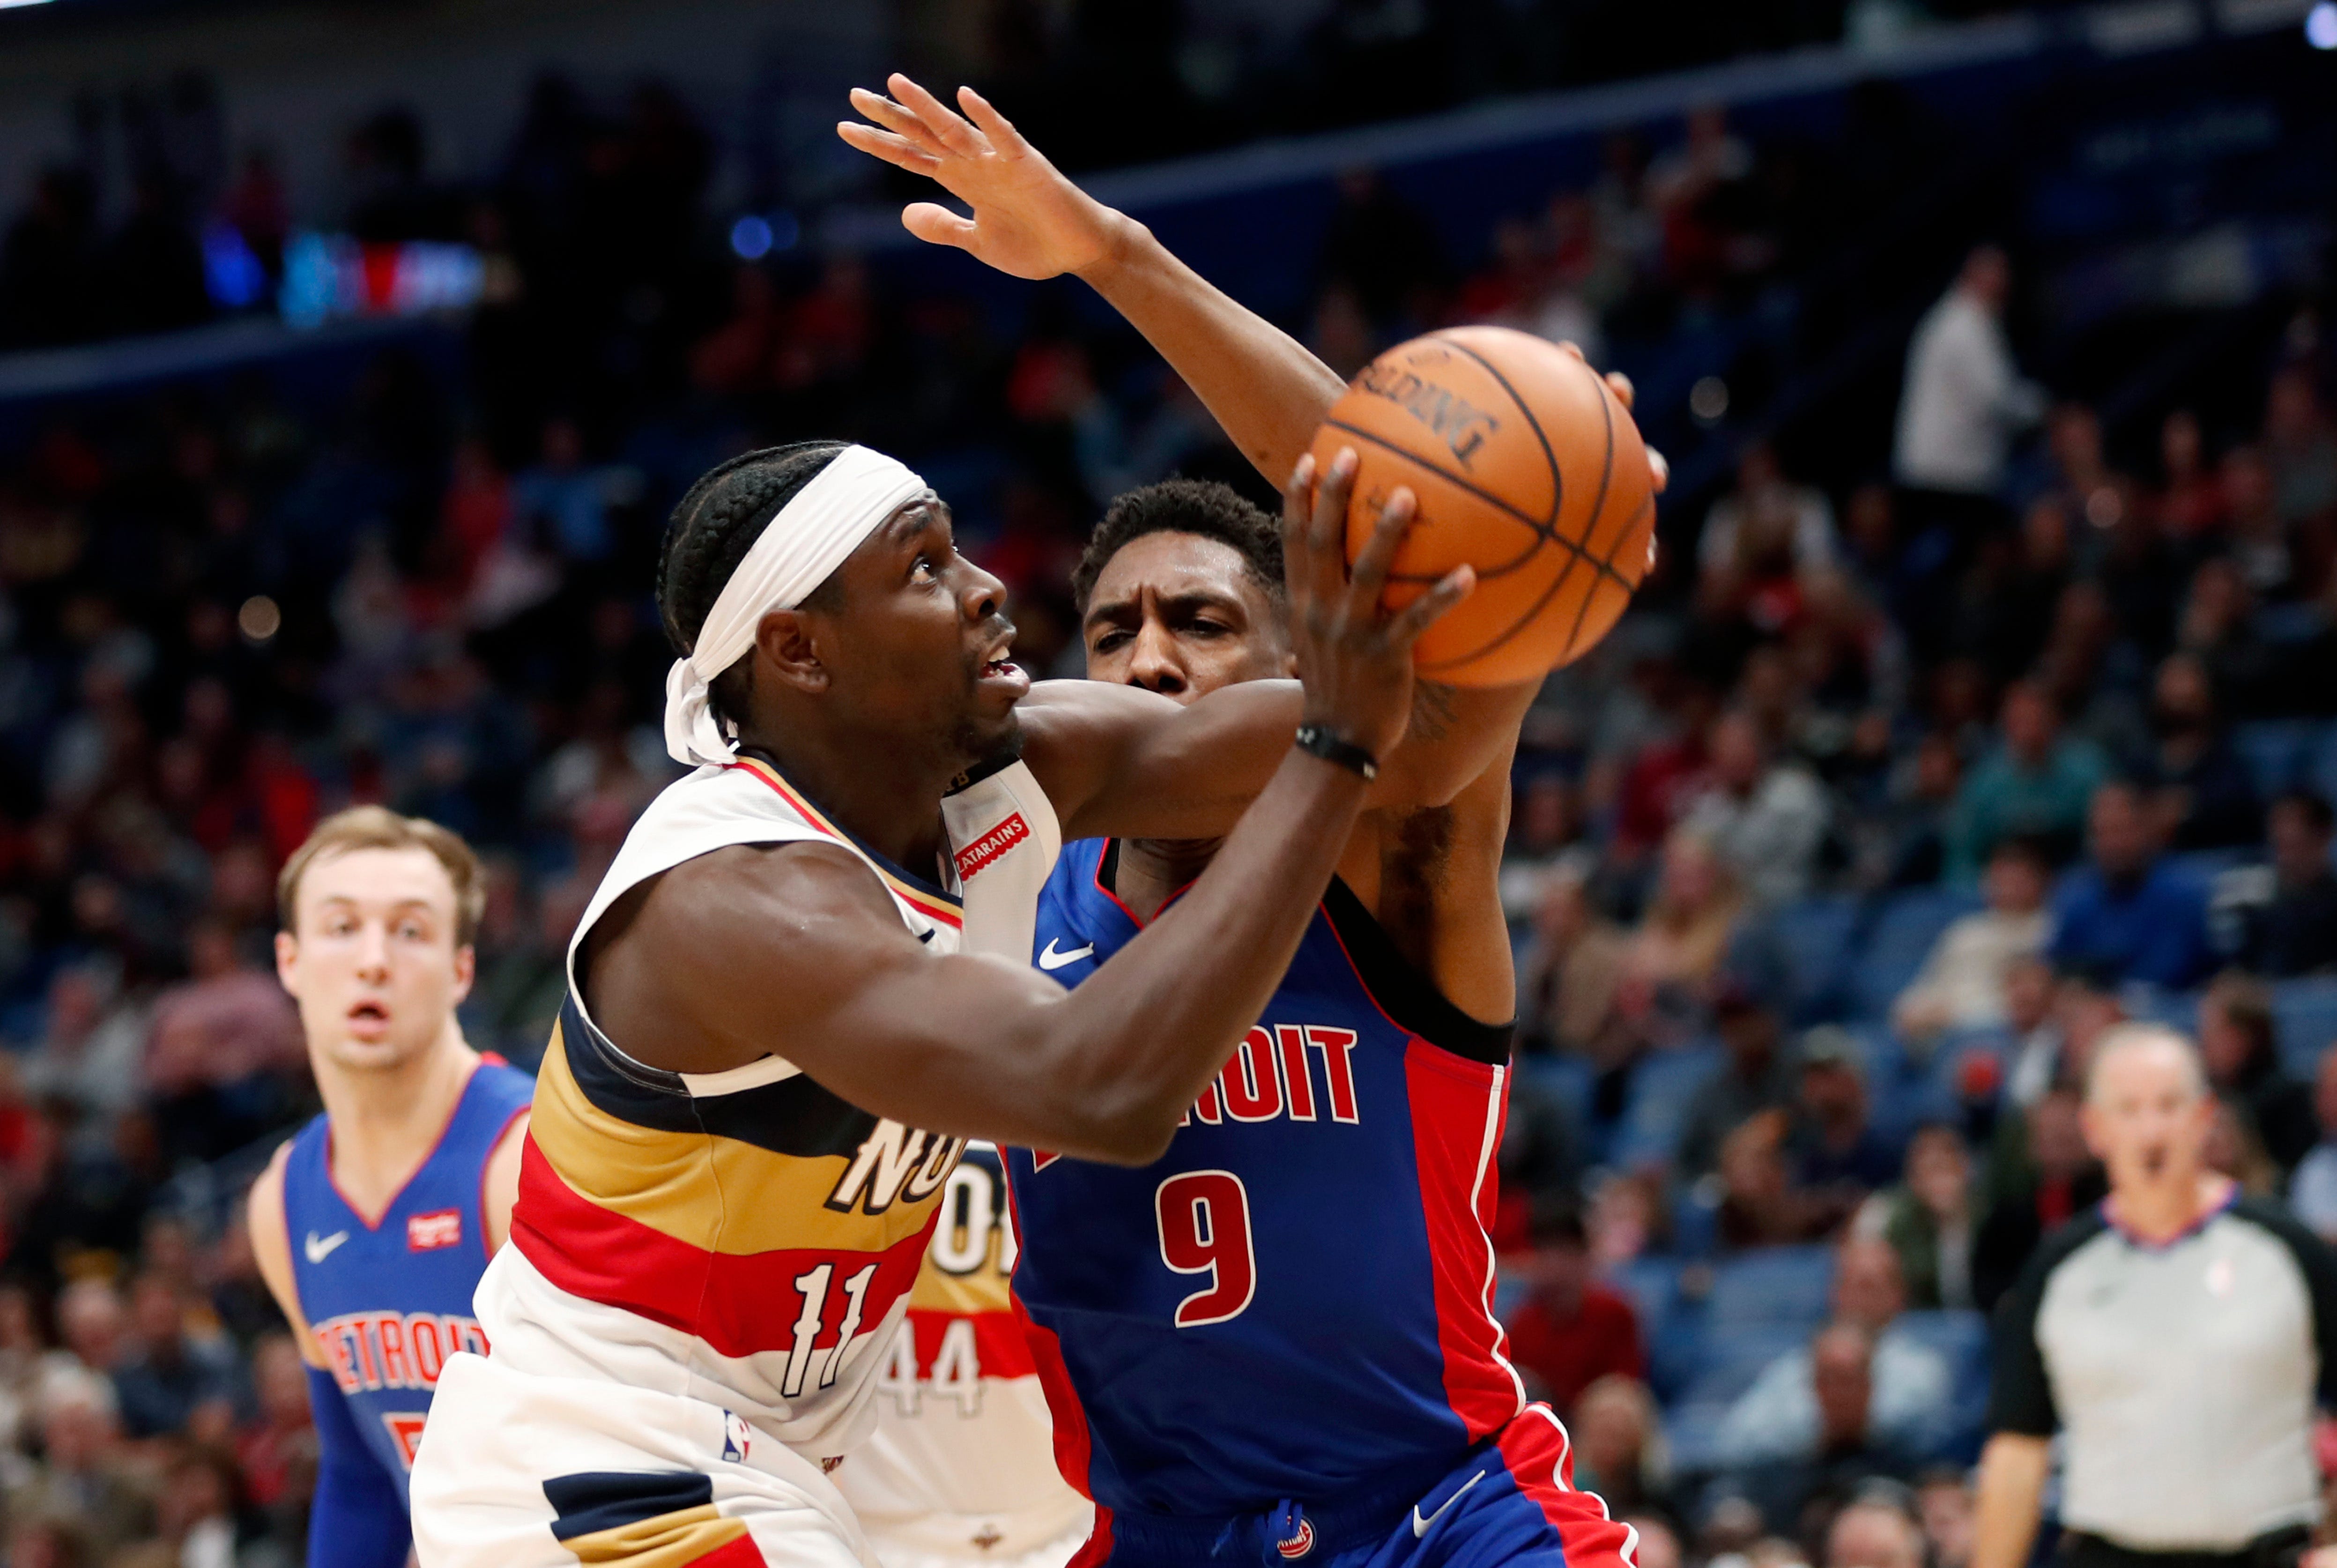 New Orleans Pelicans guard Jrue Holiday (11) drives to the basket against Detroit Pistons guard Langston Galloway (9) during the second half.